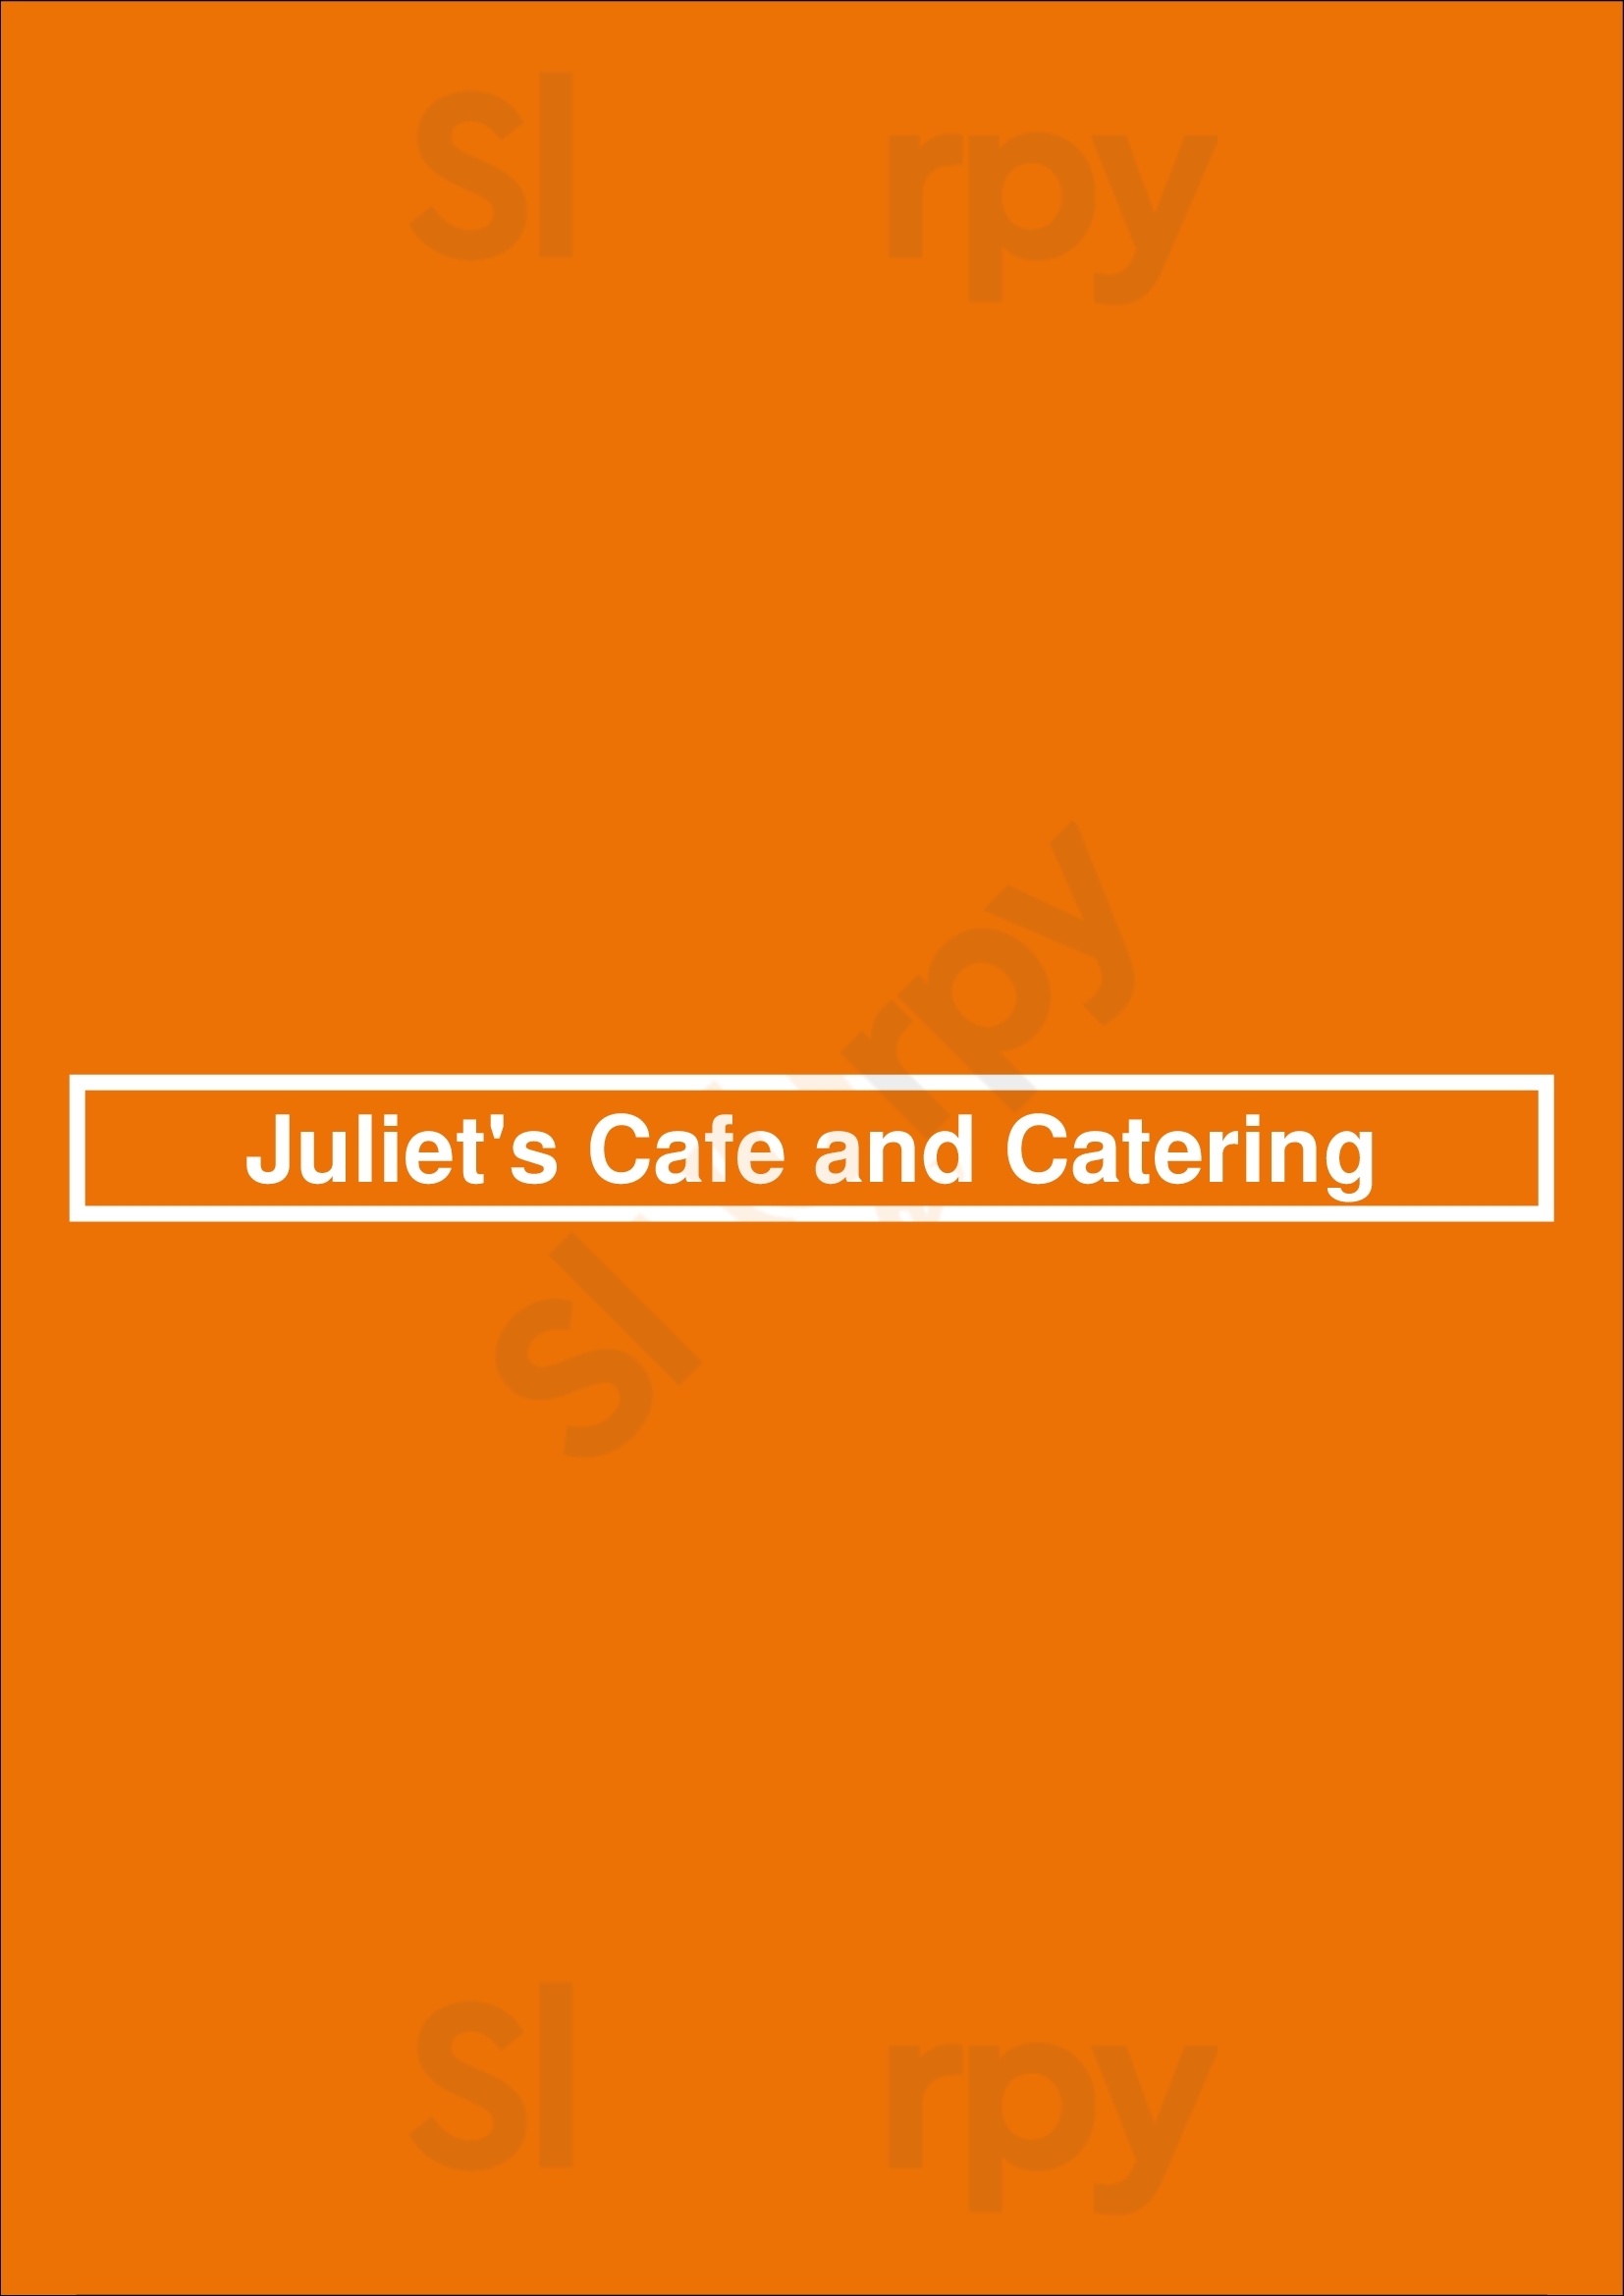 Juliet's Cafe And Catering Vancouver Menu - 1